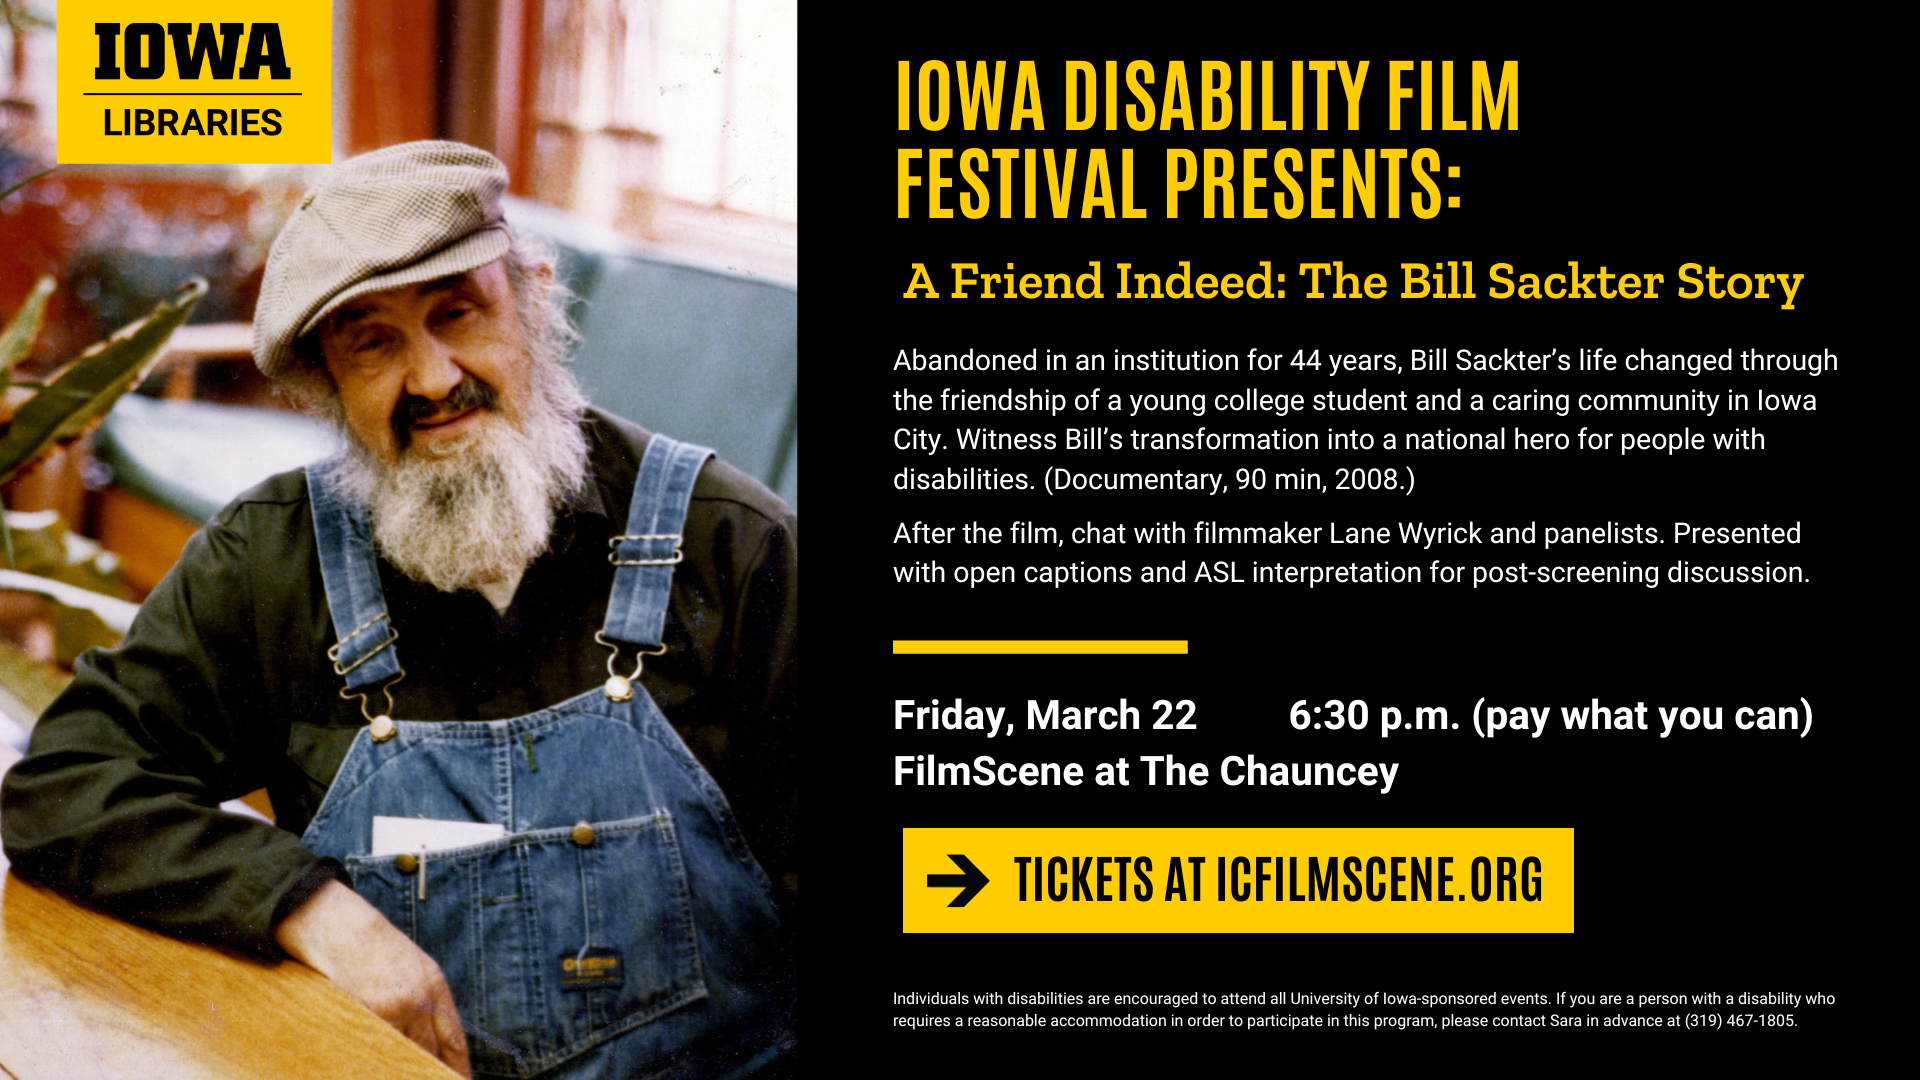 A Friend Indeed: The Bill Sackter Story. Screening with filmmaker at FilmScene at The Chauncey at 6:30 p.m. on March 22, pay what you can. Tickets at FilmScene.org.